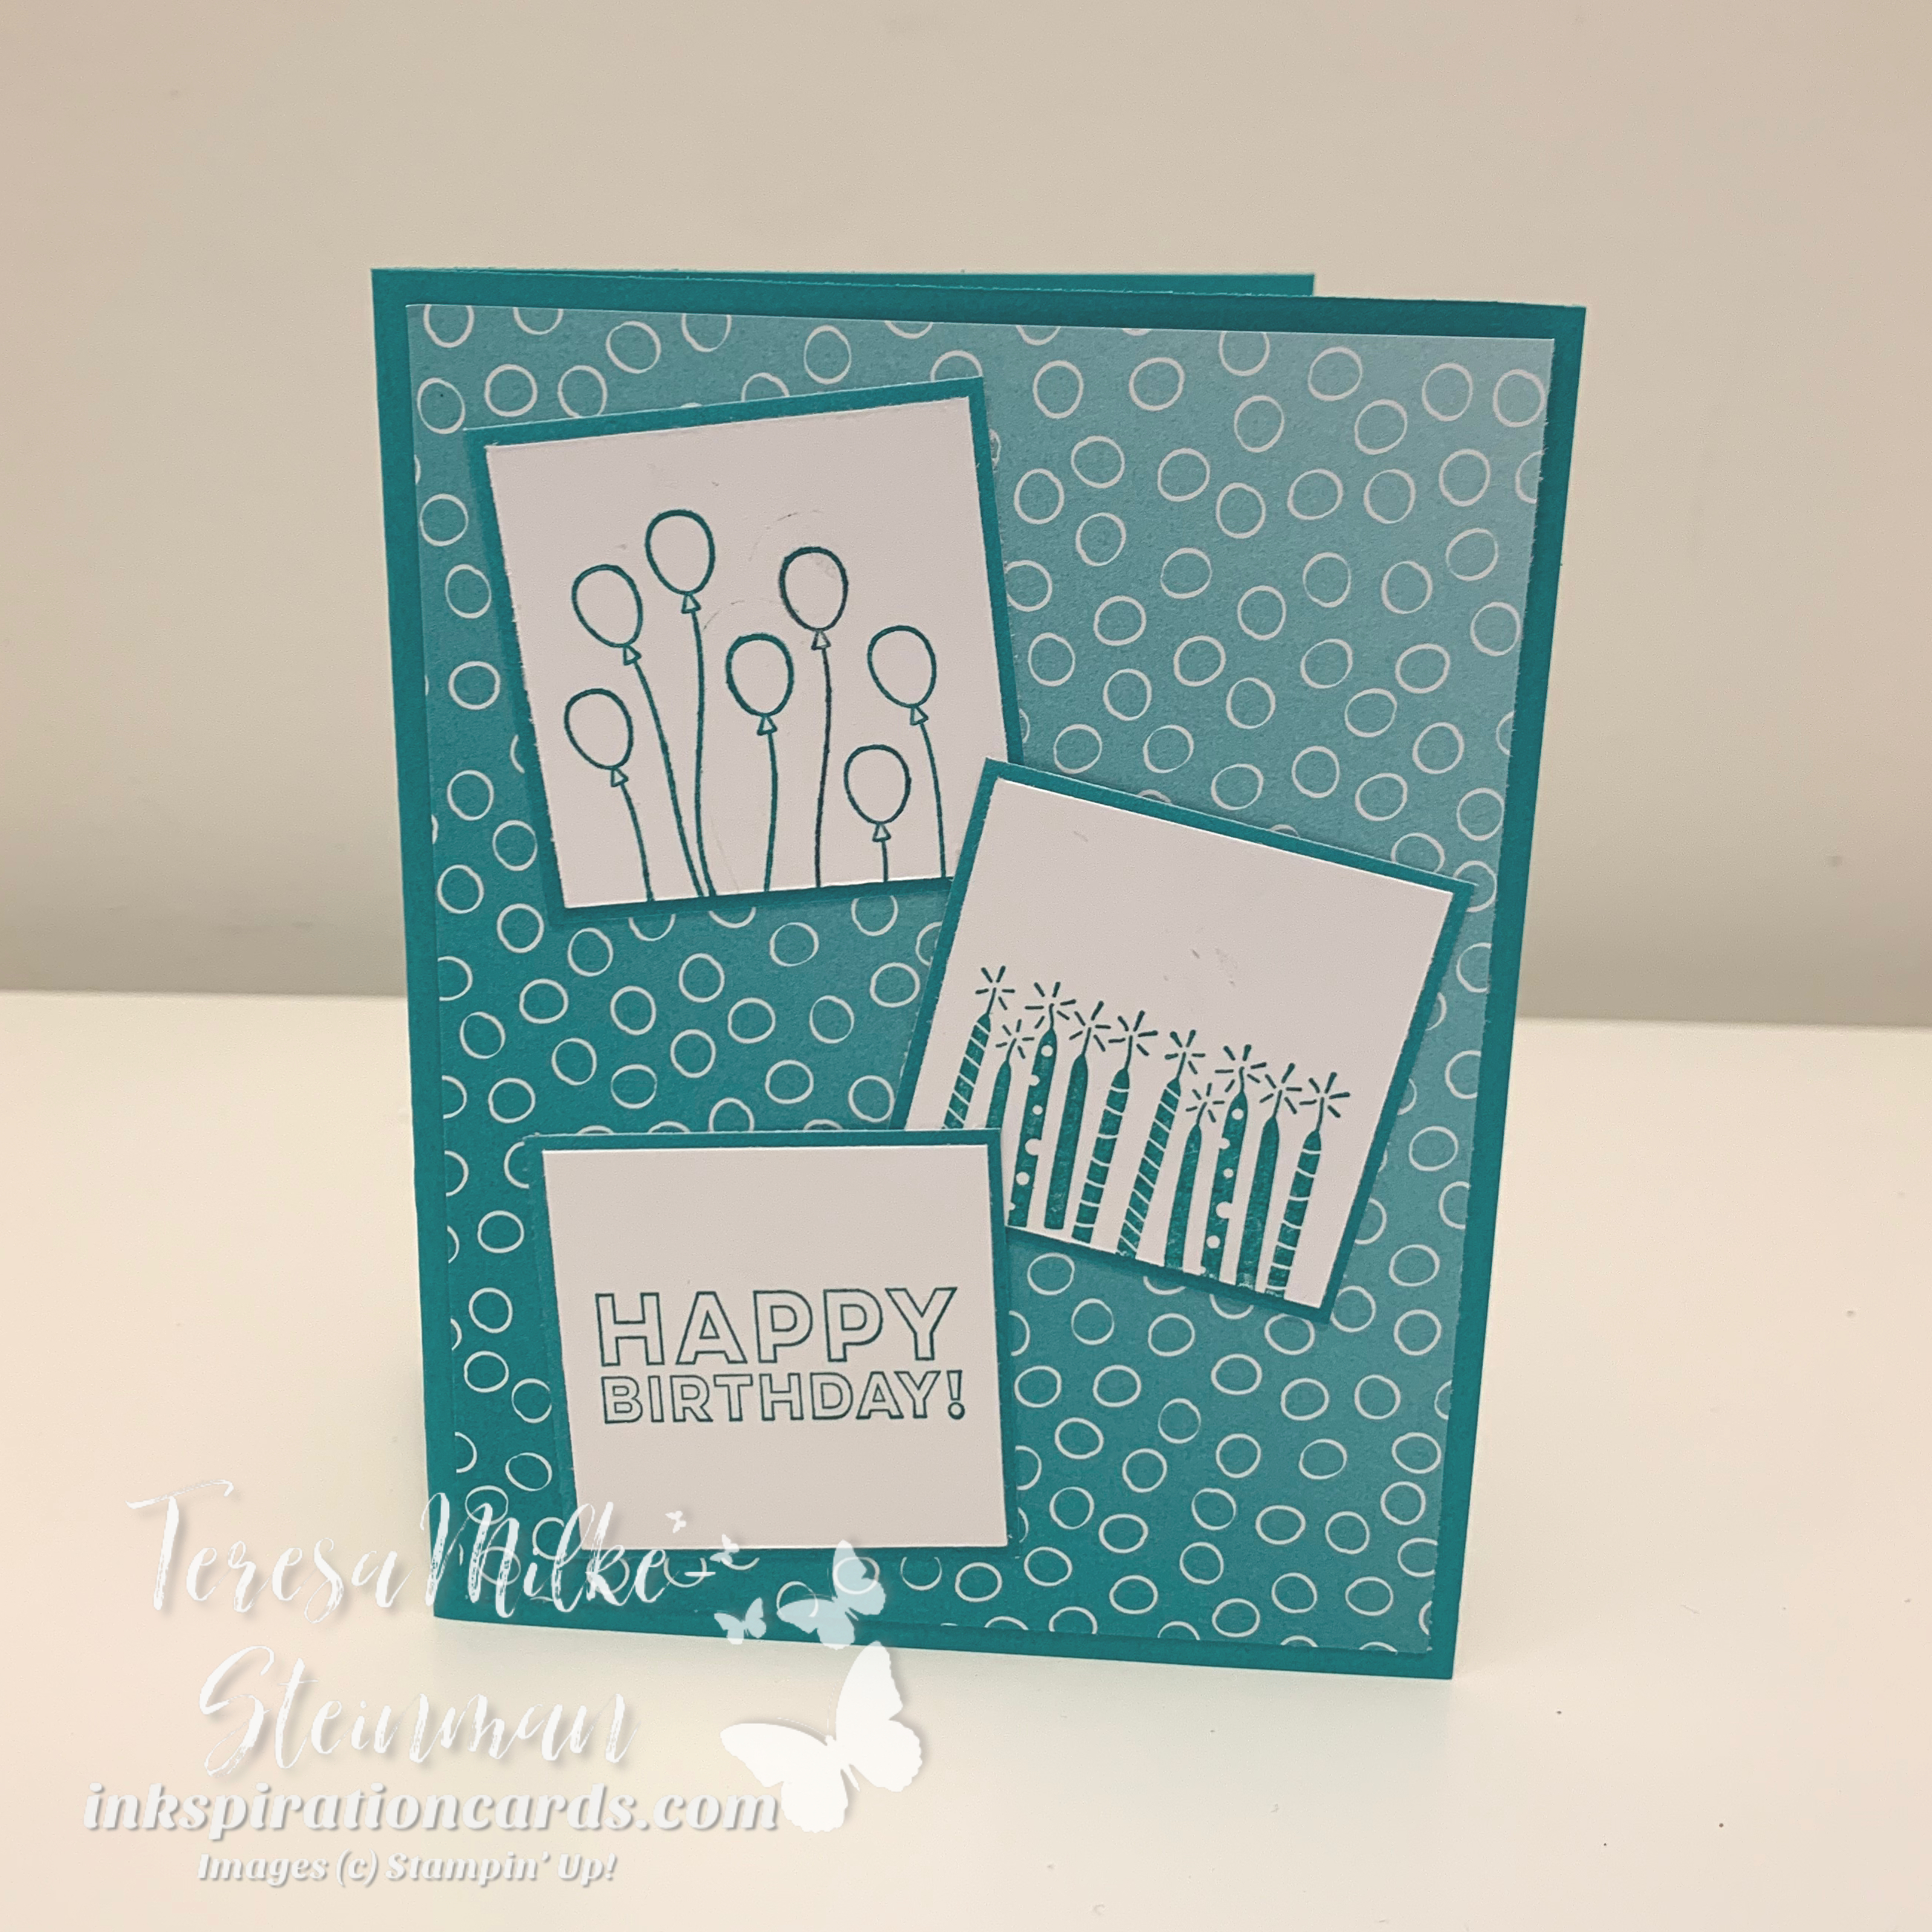 A #simplestamping birthday